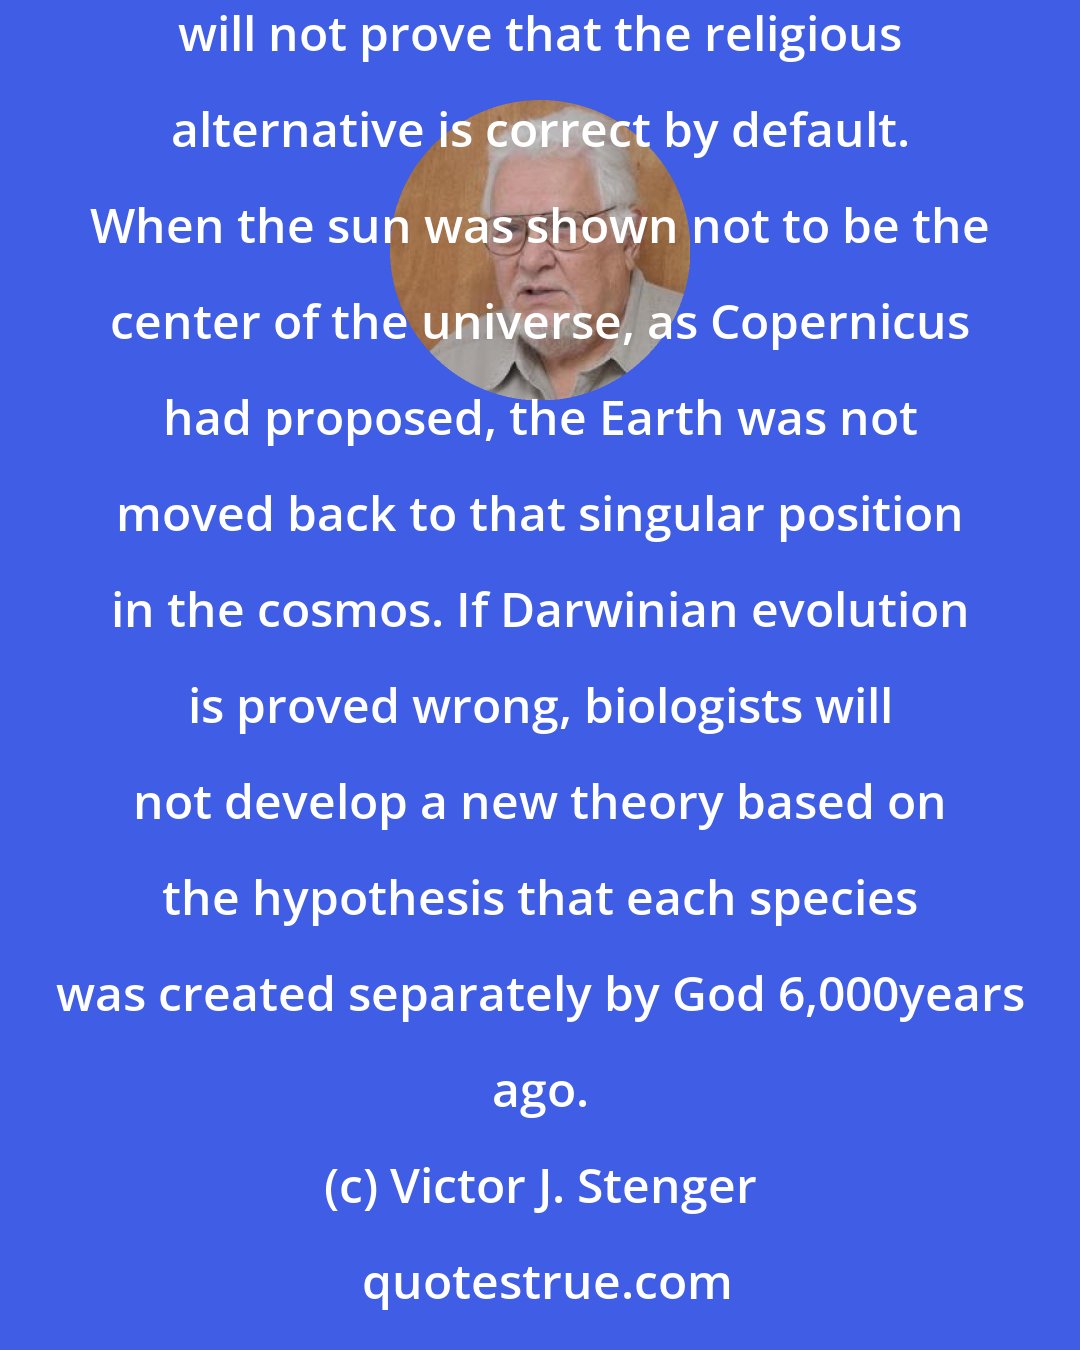 Victor J. Stenger: Any strategy that attempts to reinforce faith by undermining science is also doomed to failure. Showing that some scientific theory is wrong will not prove that the religious alternative is correct by default. When the sun was shown not to be the center of the universe, as Copernicus had proposed, the Earth was not moved back to that singular position in the cosmos. If Darwinian evolution is proved wrong, biologists will not develop a new theory based on the hypothesis that each species was created separately by God 6,000years ago.